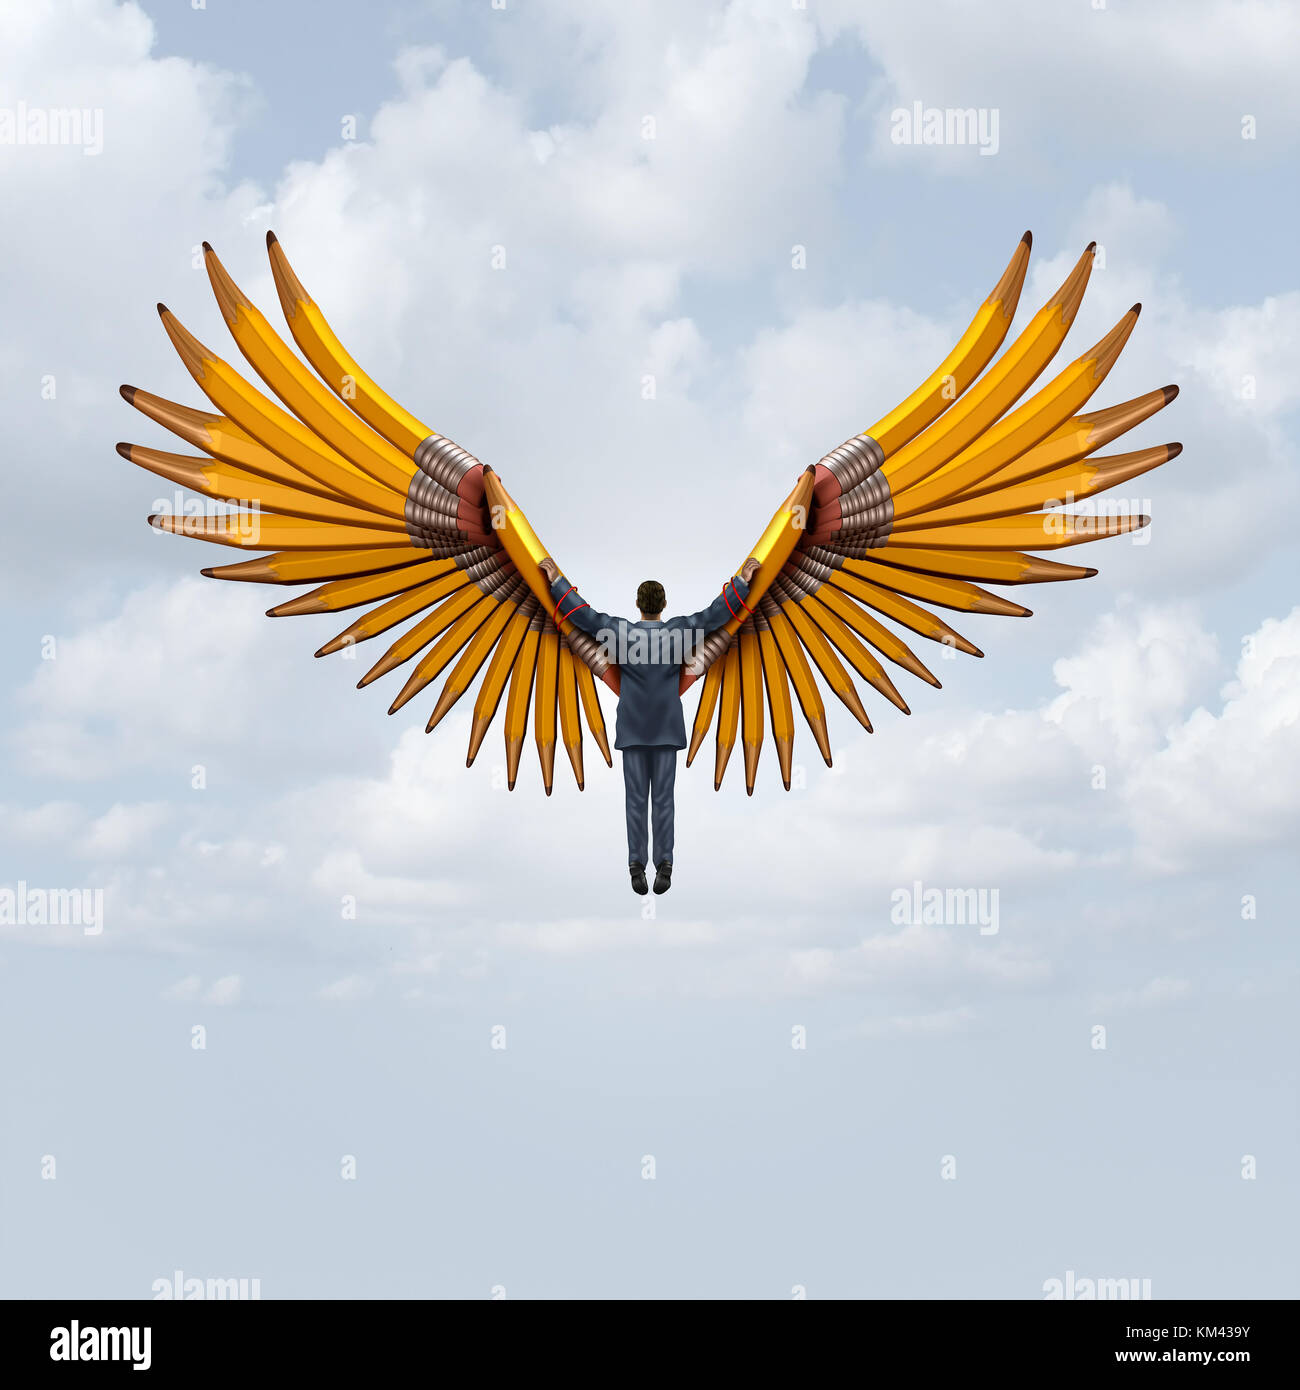 Business creative freedom as a leader flying with wings made of pencils as an imagination journey to creativity success. Stock Photo